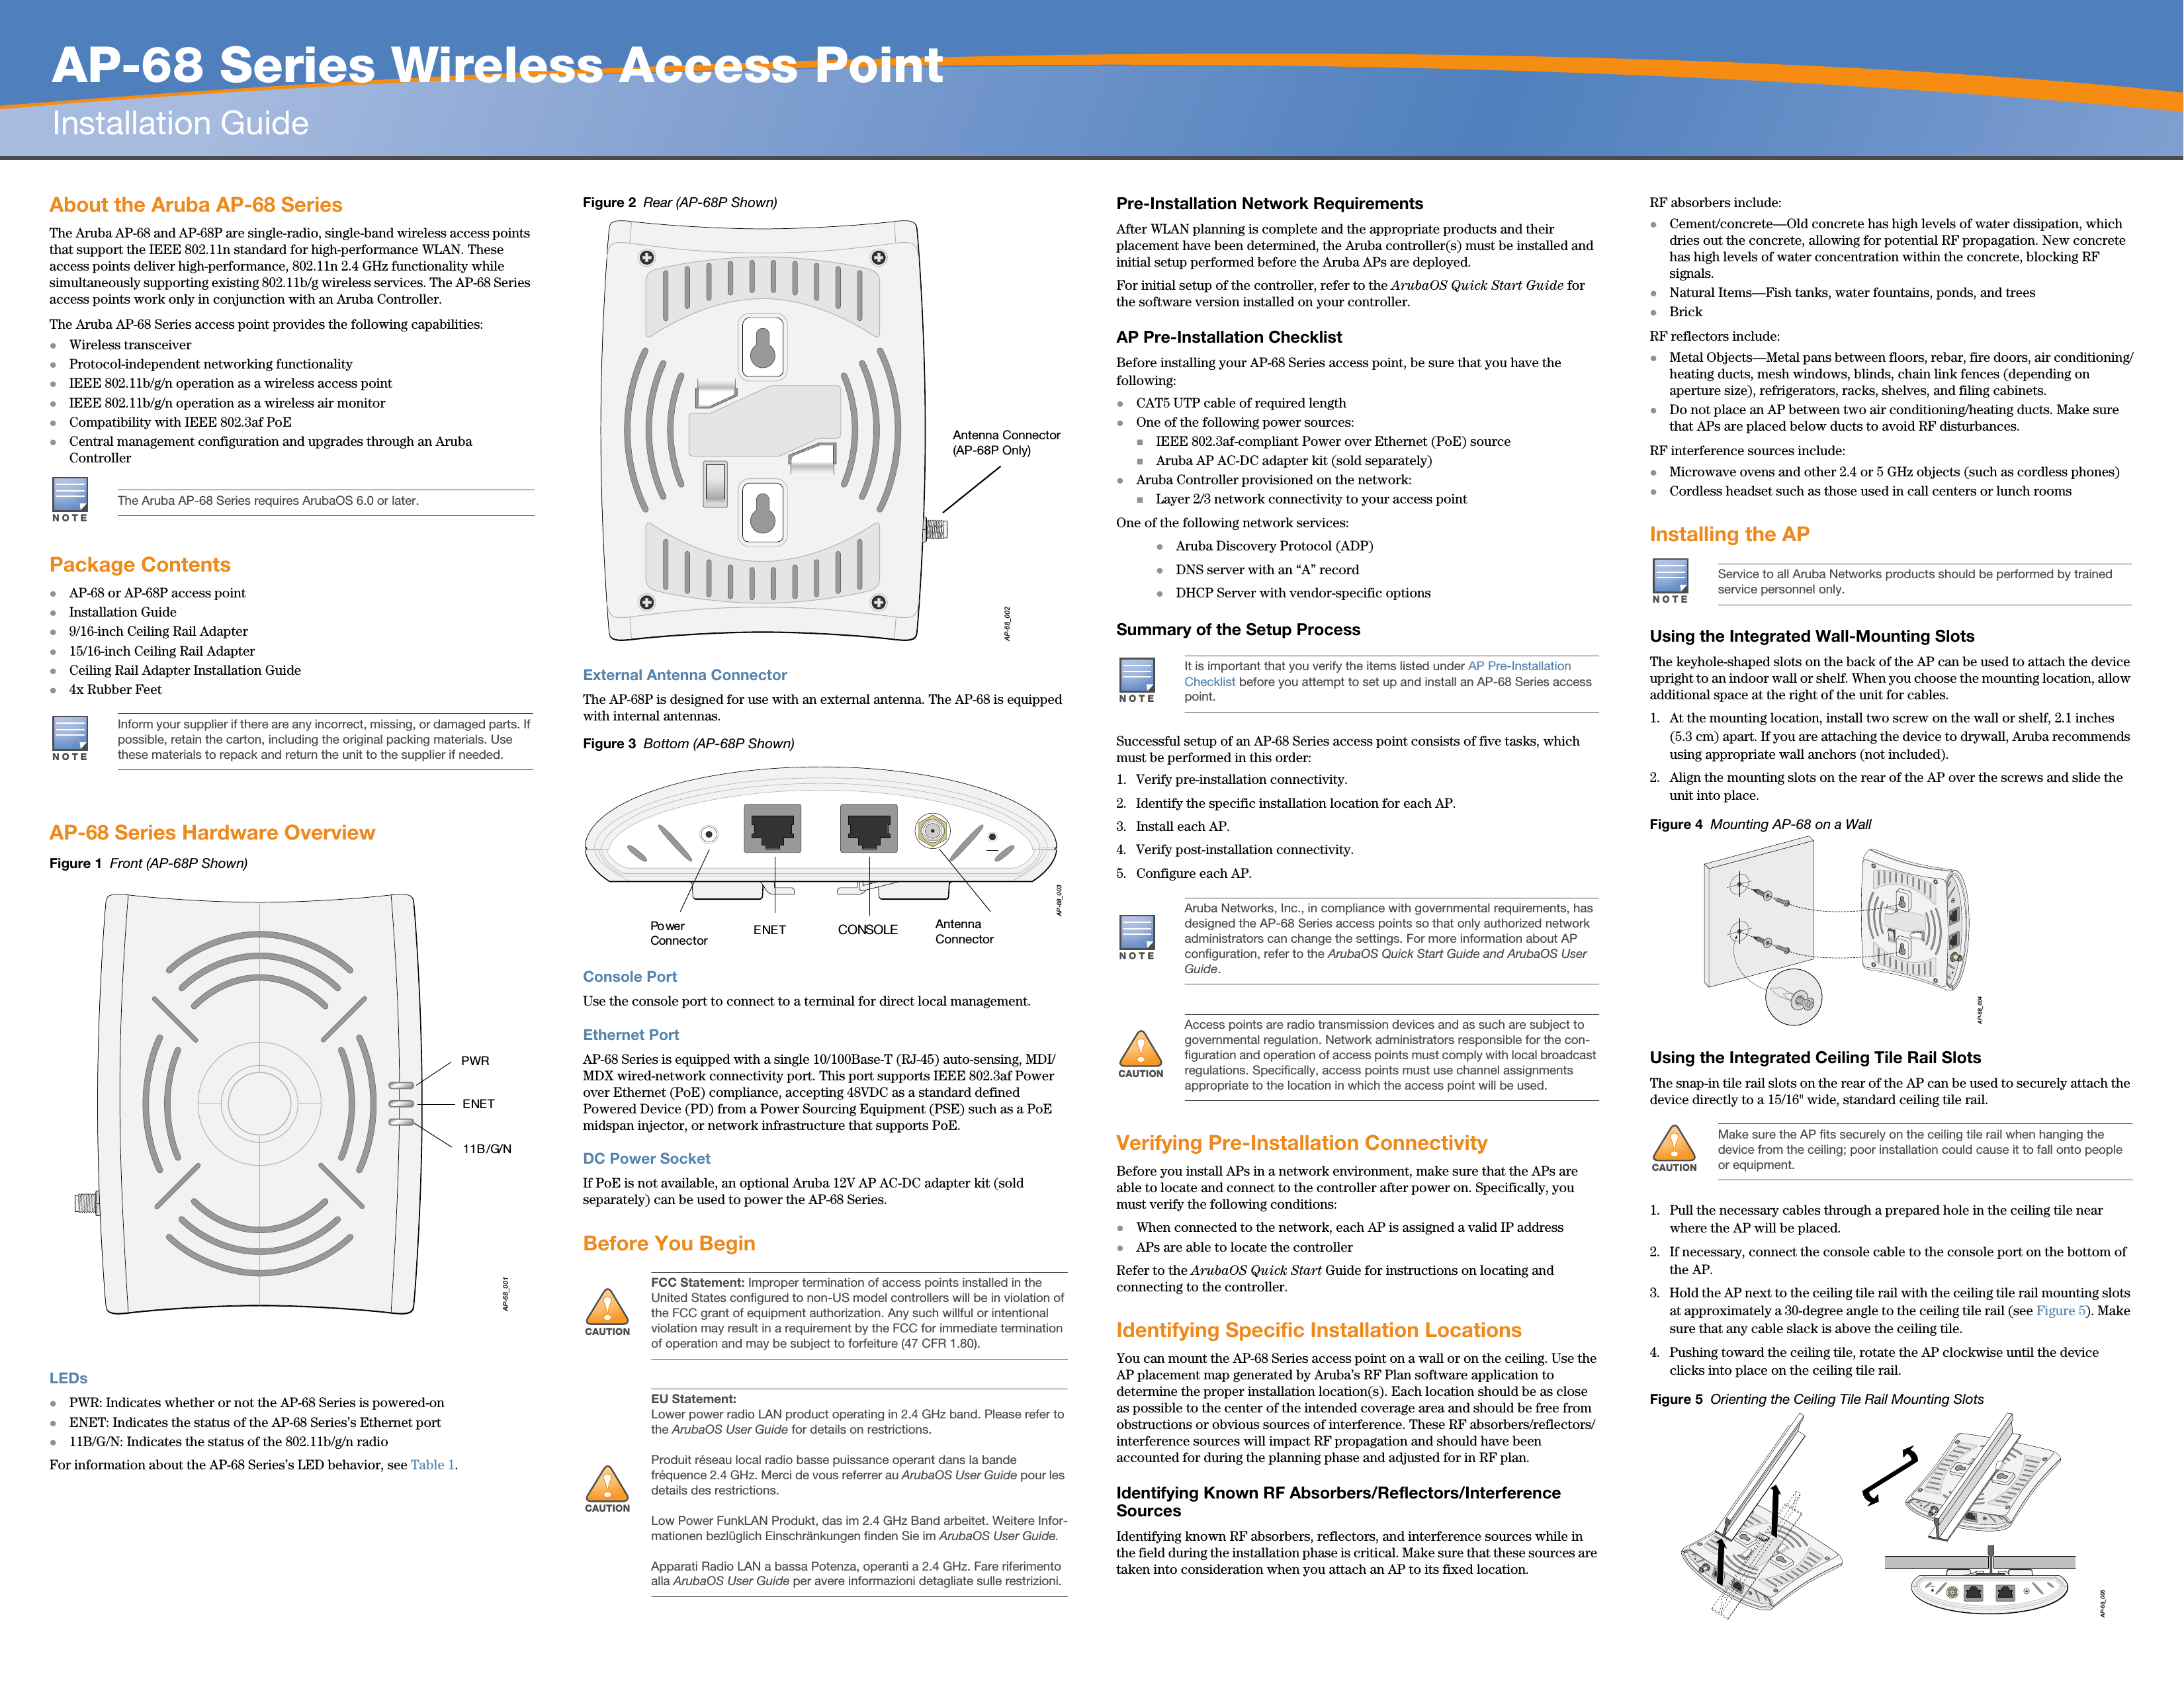   AP-68 Series Wireless Access PointInstallation GuideAbout the Aruba AP-68 SeriesThe Aruba AP-68 and AP-68P are single-radio, single-band wireless access points that support the IEEE 802.11n standard for high-performance WLAN. These access points deliver high-performance, 802.11n 2.4 GHz functionality while simultaneously supporting existing 802.11b/g wireless services. The AP-68 Series access points work only in conjunction with an Aruba Controller.The Aruba AP-68 Series access point provides the following capabilities:zWireless transceiverzProtocol-independent networking functionalityzIEEE 802.11b/g/n operation as a wireless access pointzIEEE 802.11b/g/n operation as a wireless air monitorzCompatibility with IEEE 802.3af PoE zCentral management configuration and upgrades through an Aruba ControllerPackage ContentszAP-68 or AP-68P access pointzInstallation Guidez9/16-inch Ceiling Rail Adapterz15/16-inch Ceiling Rail AdapterzCeiling Rail Adapter Installation Guidez4x Rubber FeetAP-68 Series Hardware OverviewFigure 1  Front (AP-68P Shown)LEDszPWR: Indicates whether or not the AP-68 Series is powered-onzENET: Indicates the status of the AP-68 Series’s Ethernet portz11B/G/N: Indicates the status of the 802.11b/g/n radioFor information about the AP-68 Series’s LED behavior, see Table 1.Figure 2  Rear (AP-68P Shown)External Antenna ConnectorThe AP-68P is designed for use with an external antenna. The AP-68 is equipped with internal antennas.Figure 3  Bottom (AP-68P Shown)Console PortUse the console port to connect to a terminal for direct local management.Ethernet PortAP-68 Series is equipped with a single 10/100Base-T (RJ-45) auto-sensing, MDI/MDX wired-network connectivity port. This port supports IEEE 802.3af Power over Ethernet (PoE) compliance, accepting 48VDC as a standard defined Powered Device (PD) from a Power Sourcing Equipment (PSE) such as a PoE midspan injector, or network infrastructure that supports PoE.DC Power SocketIf PoE is not available, an optional Aruba 12V AP AC-DC adapter kit (sold separately) can be used to power the AP-68 Series. Before You BeginPre-Installation Network RequirementsAfter WLAN planning is complete and the appropriate products and their placement have been determined, the Aruba controller(s) must be installed and initial setup performed before the Aruba APs are deployed.For initial setup of the controller, refer to the ArubaOS Quick Start Guide for the software version installed on your controller.AP Pre-Installation ChecklistBefore installing your AP-68 Series access point, be sure that you have the following:zCAT5 UTP cable of required lengthzOne of the following power sources:IEEE 802.3af-compliant Power over Ethernet (PoE) sourceAruba AP AC-DC adapter kit (sold separately)zAruba Controller provisioned on the network:Layer 2/3 network connectivity to your access pointOne of the following network services:zAruba Discovery Protocol (ADP)zDNS server with an “A” recordzDHCP Server with vendor-specific optionsSummary of the Setup ProcessSuccessful setup of an AP-68 Series access point consists of five tasks, which must be performed in this order:1. Verify pre-installation connectivity.2. Identify the specific installation location for each AP.3. Install each AP.4. Verify post-installation connectivity.5. Configure each AP.Verifying Pre-Installation ConnectivityBefore you install APs in a network environment, make sure that the APs are able to locate and connect to the controller after power on. Specifically, you must verify the following conditions:zWhen connected to the network, each AP is assigned a valid IP addresszAPs are able to locate the controller Refer to the ArubaOS Quick Start Guide for instructions on locating and connecting to the controller.Identifying Specific Installation LocationsYou can mount the AP-68 Series access point on a wall or on the ceiling. Use the AP placement map generated by Aruba’s RF Plan software application to determine the proper installation location(s). Each location should be as close as possible to the center of the intended coverage area and should be free from obstructions or obvious sources of interference. These RF absorbers/reflectors/interference sources will impact RF propagation and should have been accounted for during the planning phase and adjusted for in RF plan.Identifying Known RF Absorbers/Reflectors/Interference SourcesIdentifying known RF absorbers, reflectors, and interference sources while in the field during the installation phase is critical. Make sure that these sources are taken into consideration when you attach an AP to its fixed location.RF absorbers include:zCement/concrete—Old concrete has high levels of water dissipation, which dries out the concrete, allowing for potential RF propagation. New concrete has high levels of water concentration within the concrete, blocking RF signals.zNatural Items—Fish tanks, water fountains, ponds, and treeszBrickRF reflectors include:zMetal Objects—Metal pans between floors, rebar, fire doors, air conditioning/heating ducts, mesh windows, blinds, chain link fences (depending on aperture size), refrigerators, racks, shelves, and filing cabinets.zDo not place an AP between two air conditioning/heating ducts. Make sure that APs are placed below ducts to avoid RF disturbances.RF interference sources include:zMicrowave ovens and other 2.4 or 5 GHz objects (such as cordless phones)zCordless headset such as those used in call centers or lunch roomsInstalling the APUsing the Integrated Wall-Mounting SlotsThe keyhole-shaped slots on the back of the AP can be used to attach the device upright to an indoor wall or shelf. When you choose the mounting location, allow additional space at the right of the unit for cables.1. At the mounting location, install two screw on the wall or shelf, 2.1 inches (5.3 cm) apart. If you are attaching the device to drywall, Aruba recommends using appropriate wall anchors (not included).2. Align the mounting slots on the rear of the AP over the screws and slide the unit into place.Figure 4  Mounting AP-68 on a WallUsing the Integrated Ceiling Tile Rail SlotsThe snap-in tile rail slots on the rear of the AP can be used to securely attach the device directly to a 15/16&quot; wide, standard ceiling tile rail.1. Pull the necessary cables through a prepared hole in the ceiling tile near where the AP will be placed.2. If necessary, connect the console cable to the console port on the bottom of the AP.3. Hold the AP next to the ceiling tile rail with the ceiling tile rail mounting slots at approximately a 30-degree angle to the ceiling tile rail (see Figure 5). Make sure that any cable slack is above the ceiling tile.4. Pushing toward the ceiling tile, rotate the AP clockwise until the device clicks into place on the ceiling tile rail.Figure 5  Orienting the Ceiling Tile Rail Mounting SlotsNOTEThe Aruba AP-68 Series requires ArubaOS 6.0 or later.NOTEInform your supplier if there are any incorrect, missing, or damaged parts. If possible, retain the carton, including the original packing materials. Use these materials to repack and return the unit to the supplier if needed.AP-68_001PWRENET11B/G/N!CAUTIONFCC Statement: Improper termination of access points installed in the United States configured to non-US model controllers will be in violation of the FCC grant of equipment authorization. Any such willful or intentional violation may result in a requirement by the FCC for immediate termination of operation and may be subject to forfeiture (47 CFR 1.80).!CAUTIONEU Statement: Lower power radio LAN product operating in 2.4 GHz band. Please refer to the ArubaOS User Guide for details on restrictions.Produit réseau local radio basse puissance operant dans la bande fréquence 2.4 GHz. Merci de vous referrer au ArubaOS User Guide pour les details des restrictions.Low Power FunkLAN Produkt, das im 2.4 GHz Band arbeitet. Weitere Infor-mationen bezlüglich Einschränkungen finden Sie im ArubaOS User Guide.Apparati Radio LAN a bassa Potenza, operanti a 2.4 GHz. Fare riferimento alla ArubaOS User Guide per avere informazioni detagliate sulle restrizioni.AP-68_002Antenna Connector(AP-68P Only)AP-68_003CONSOLEENETPo wer ConnectorAntenna ConnectorNOTEIt is important that you verify the items listed under AP Pre-Installation Checklist before you attempt to set up and install an AP-68 Series access point.NOTEAruba Networks, Inc., in compliance with governmental requirements, has designed the AP-68 Series access points so that only authorized network administrators can change the settings. For more information about AP configuration, refer to the ArubaOS Quick Start Guide and ArubaOS User Guide.!CAUTIONAccess points are radio transmission devices and as such are subject to governmental regulation. Network administrators responsible for the con-figuration and operation of access points must comply with local broadcast regulations. Specifically, access points must use channel assignments appropriate to the location in which the access point will be used.NOTEService to all Aruba Networks products should be performed by trained service personnel only.!CAUTIONMake sure the AP fits securely on the ceiling tile rail when hanging the device from the ceiling; poor installation could cause it to fall onto people or equipment.AP-68_004AP-68_005